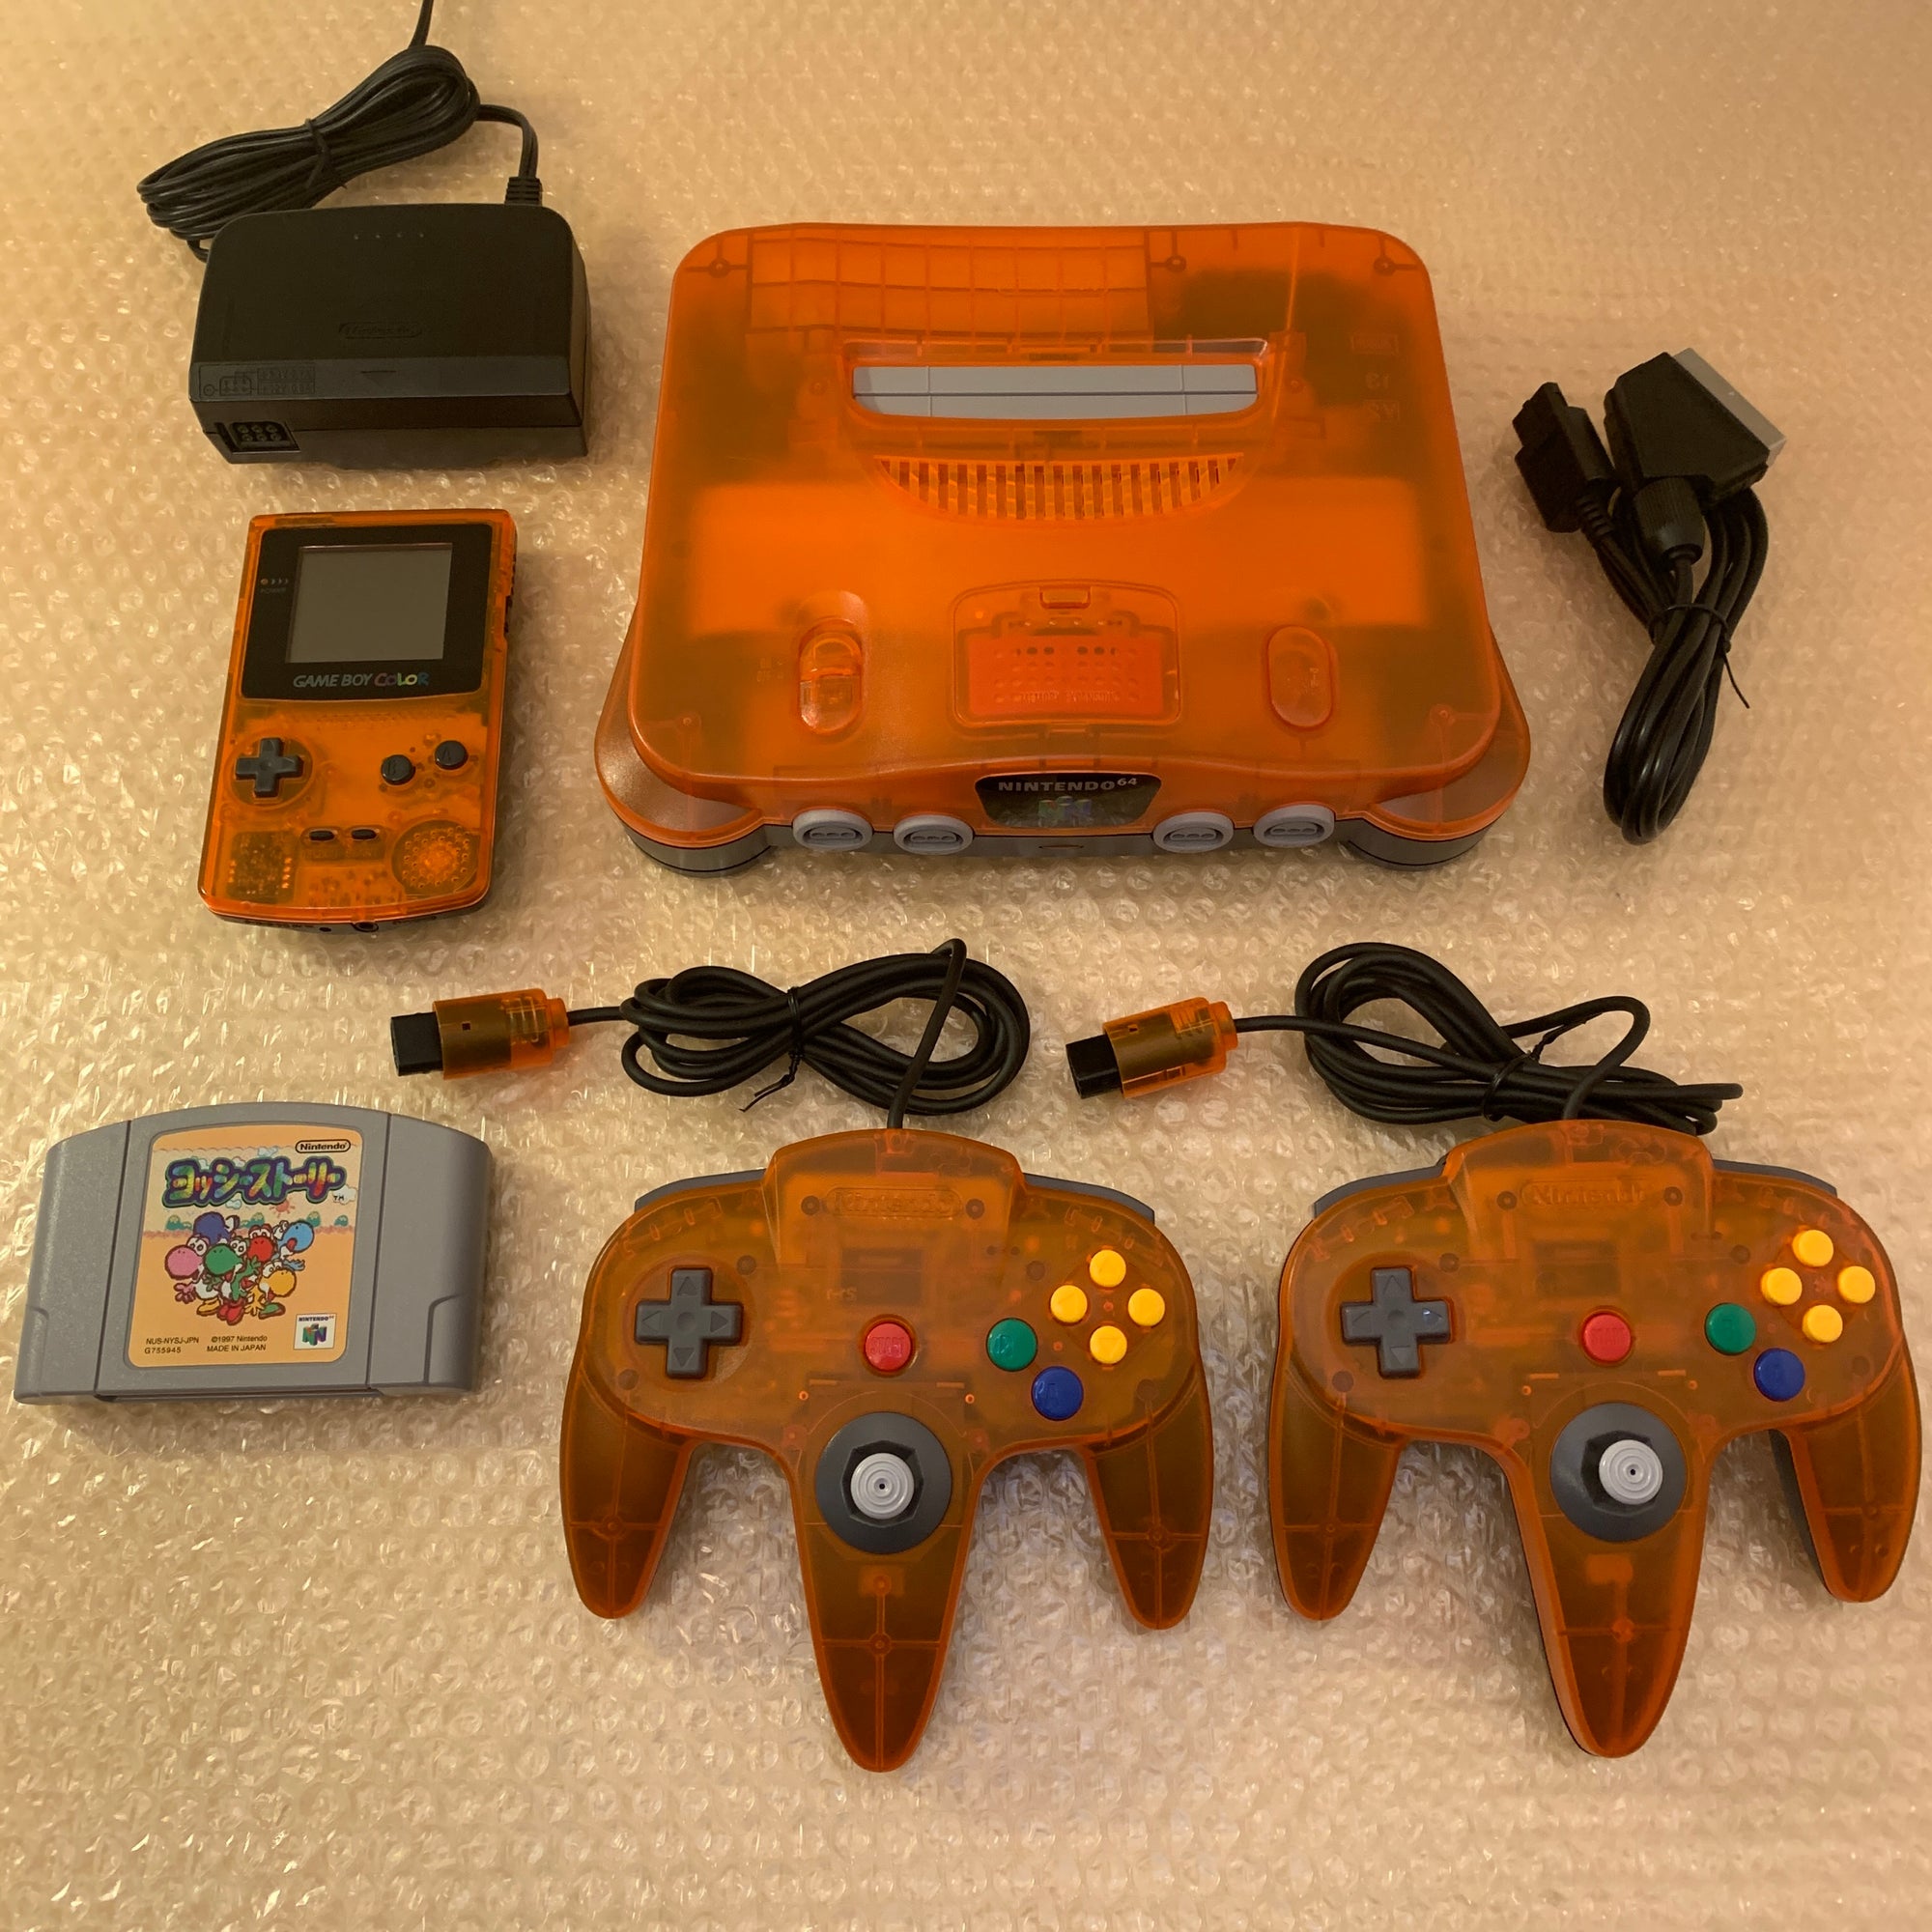 Daiei Hawks Nintendo 64 set with ULTRA HDMI (HW2 with RGB) kit - compatible with JP and US games  - With matching Game Boy Color